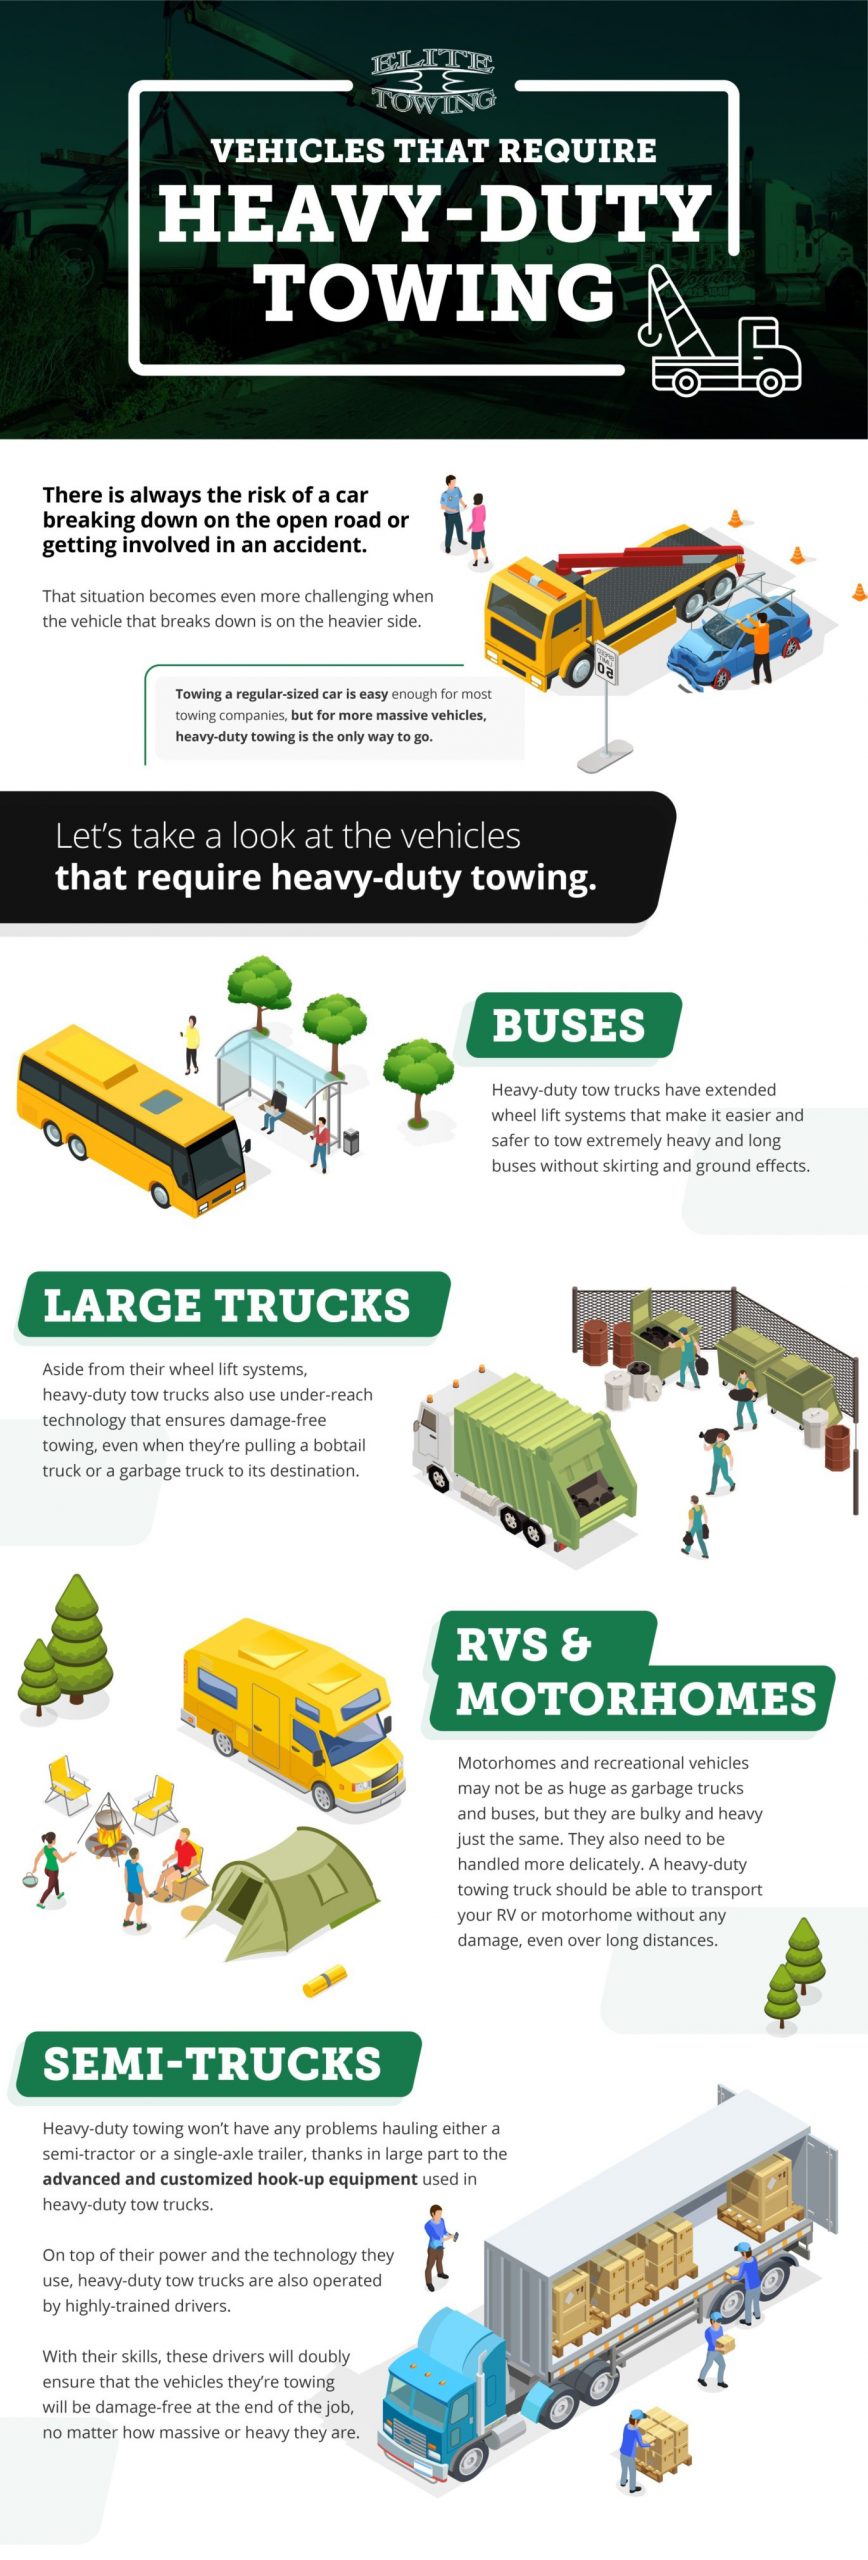 Vehicles That Require Heavy-Duty Towing